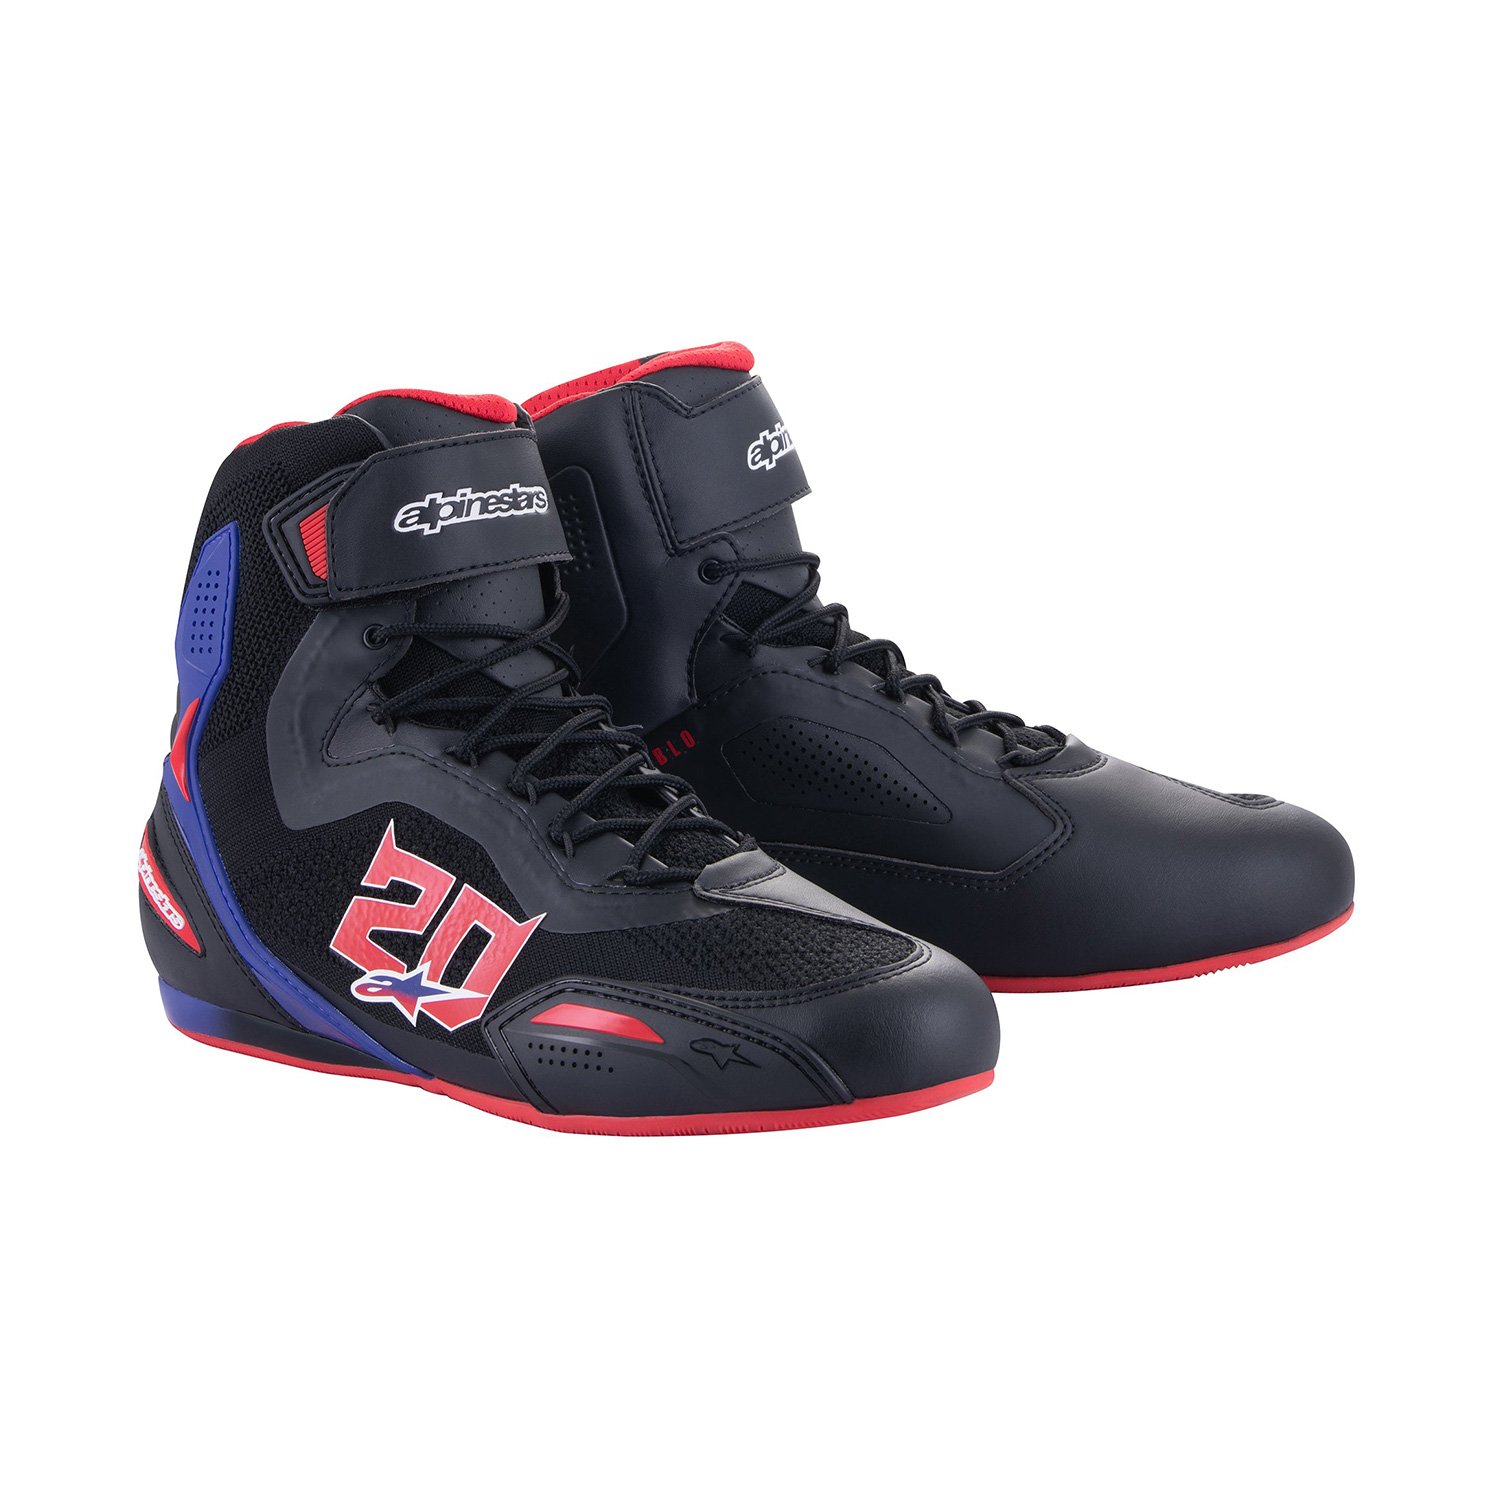 Image of EU Alpinestars FQ20 Faster-3 Rideknit Noir Bright Rouge Bleu Chaussures Taille US 13